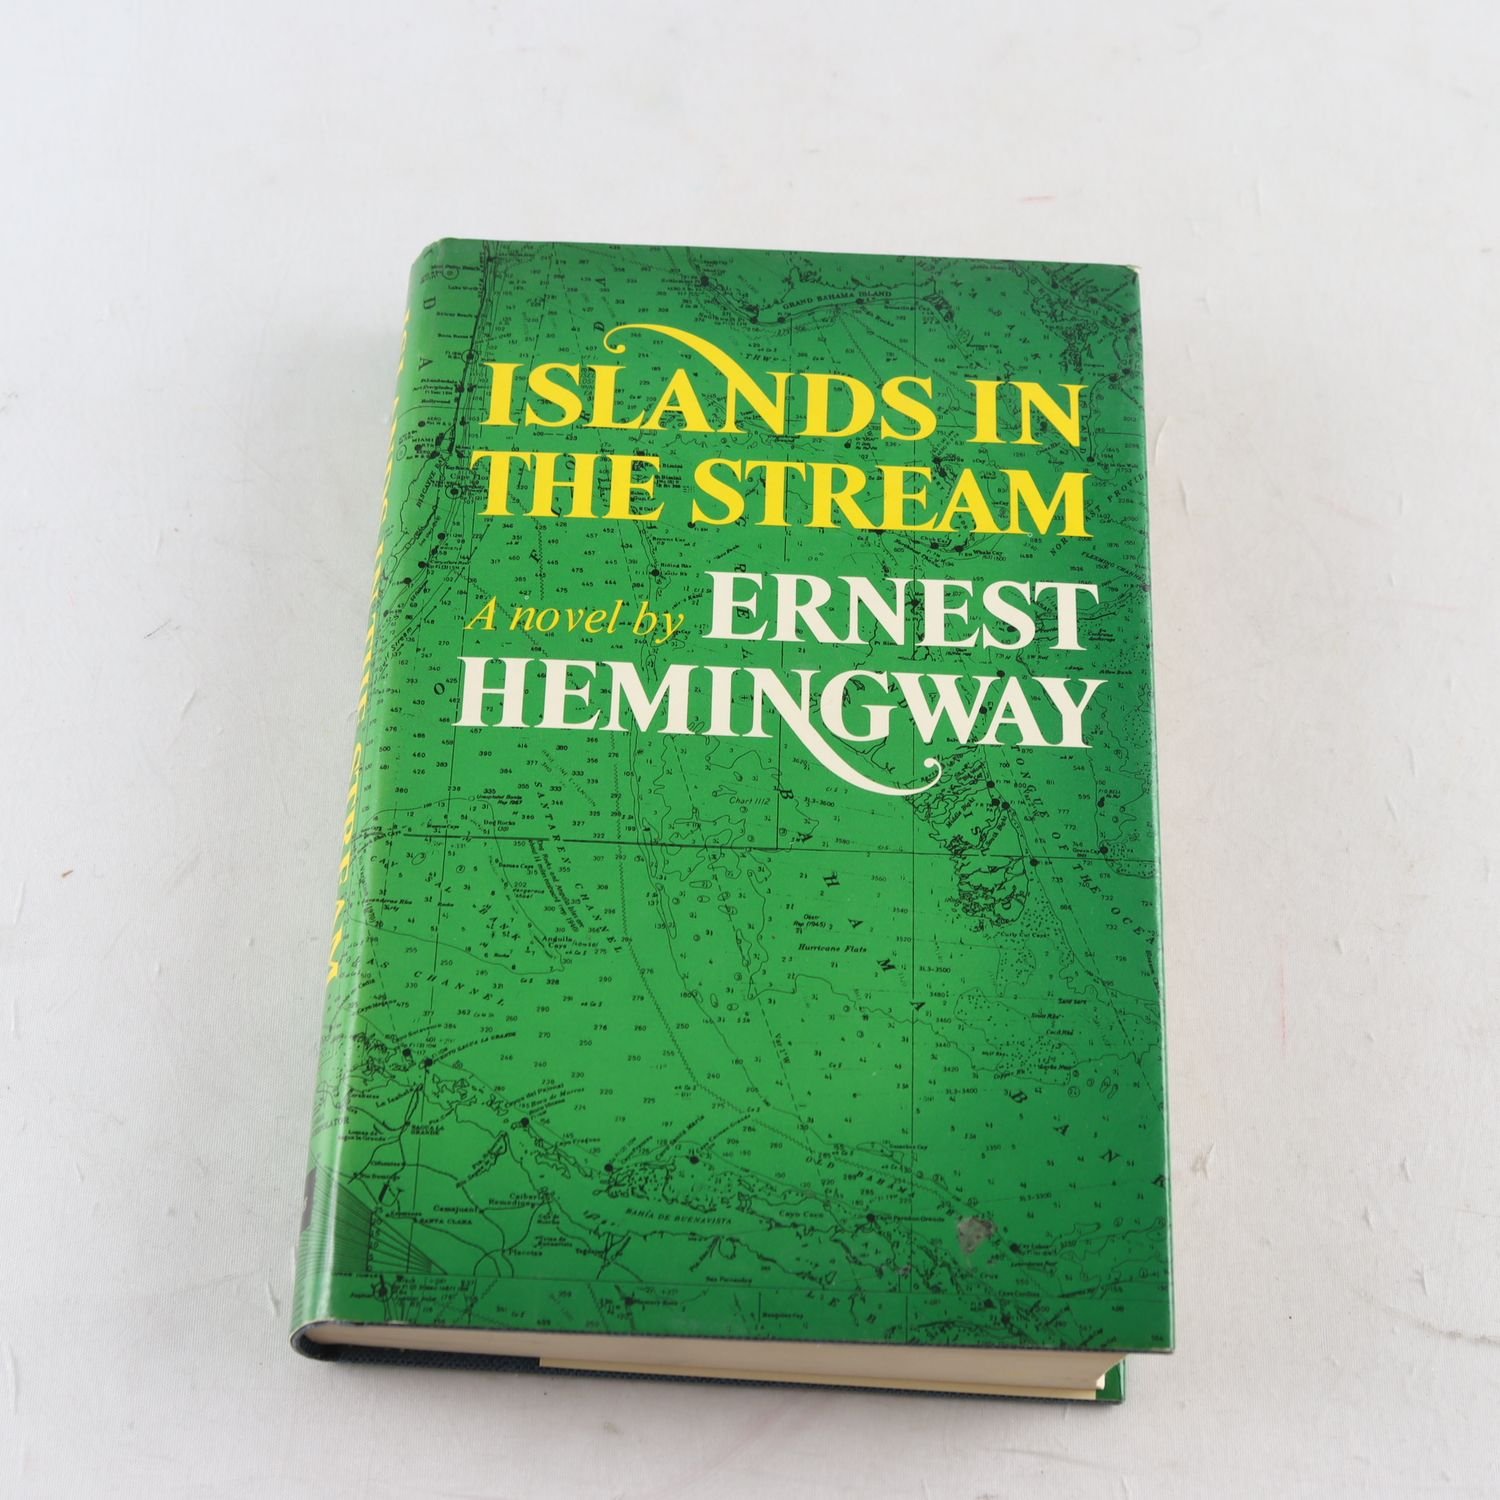 Ernest Hemingway, Islands in the Stream (First edition, 1970)